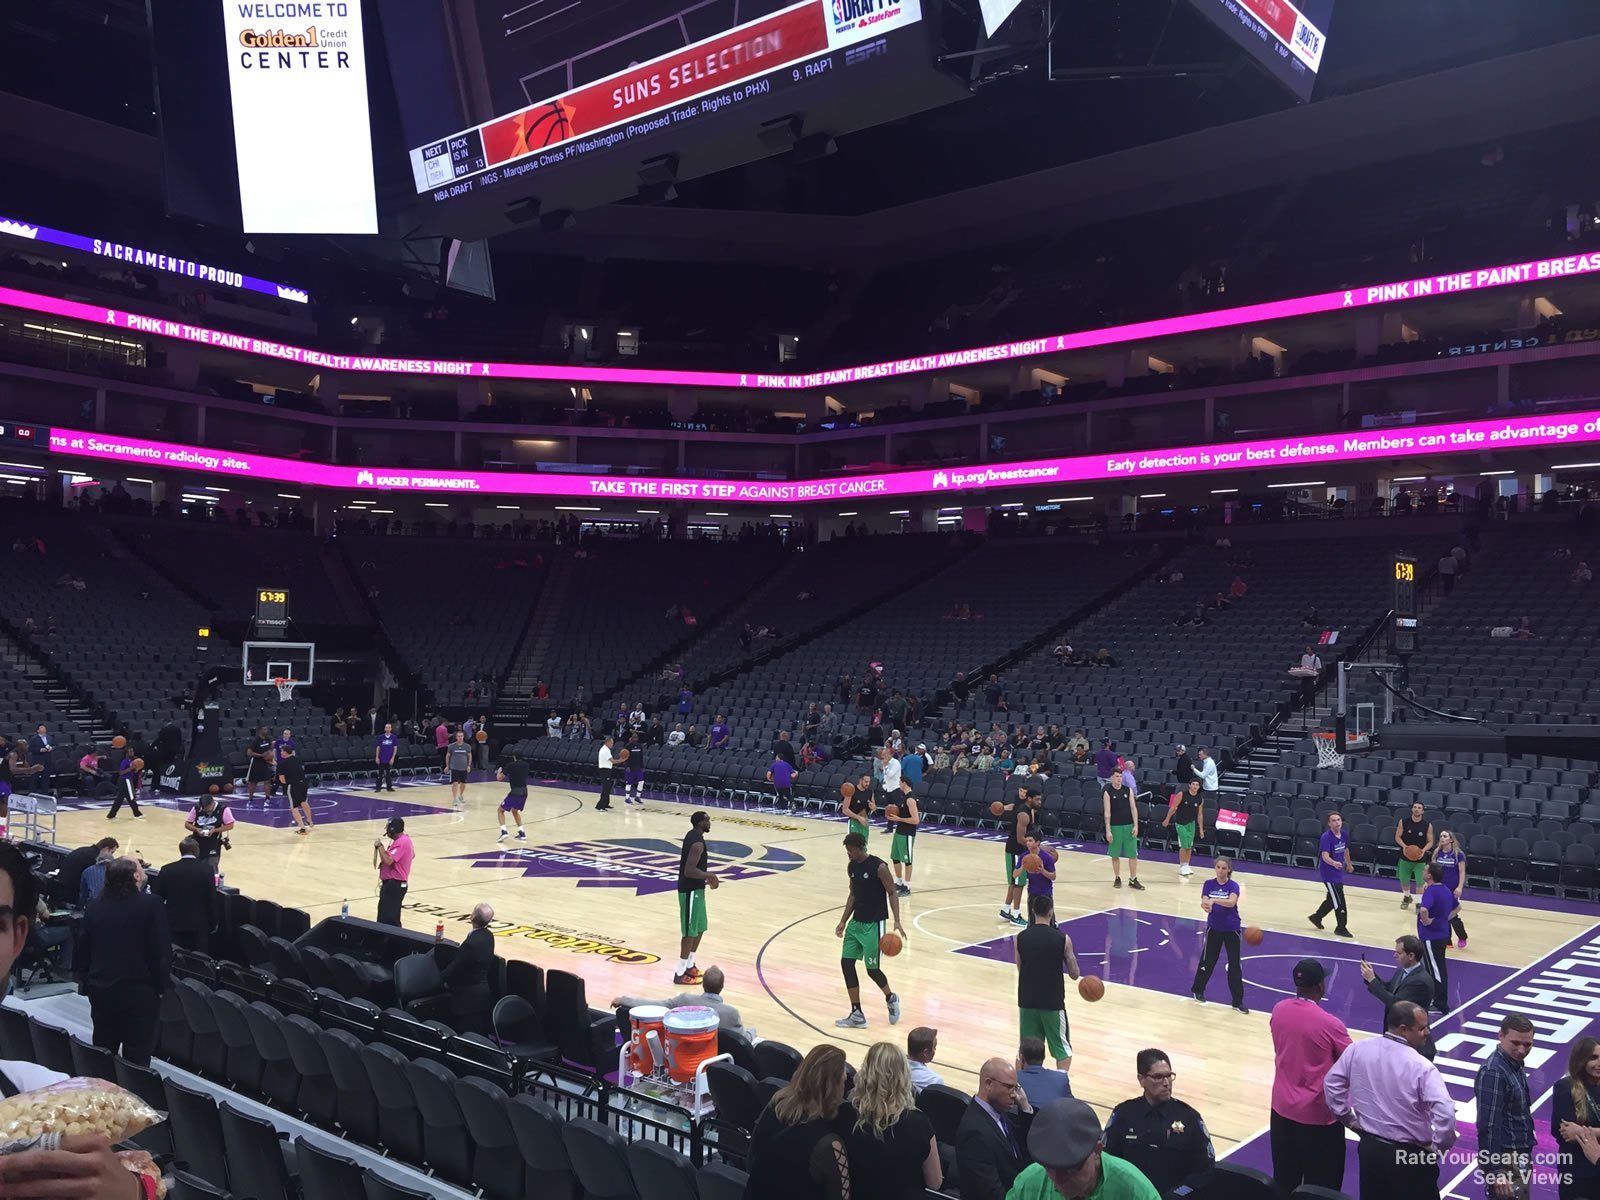 section 104, row dd seat view  for basketball - golden 1 center